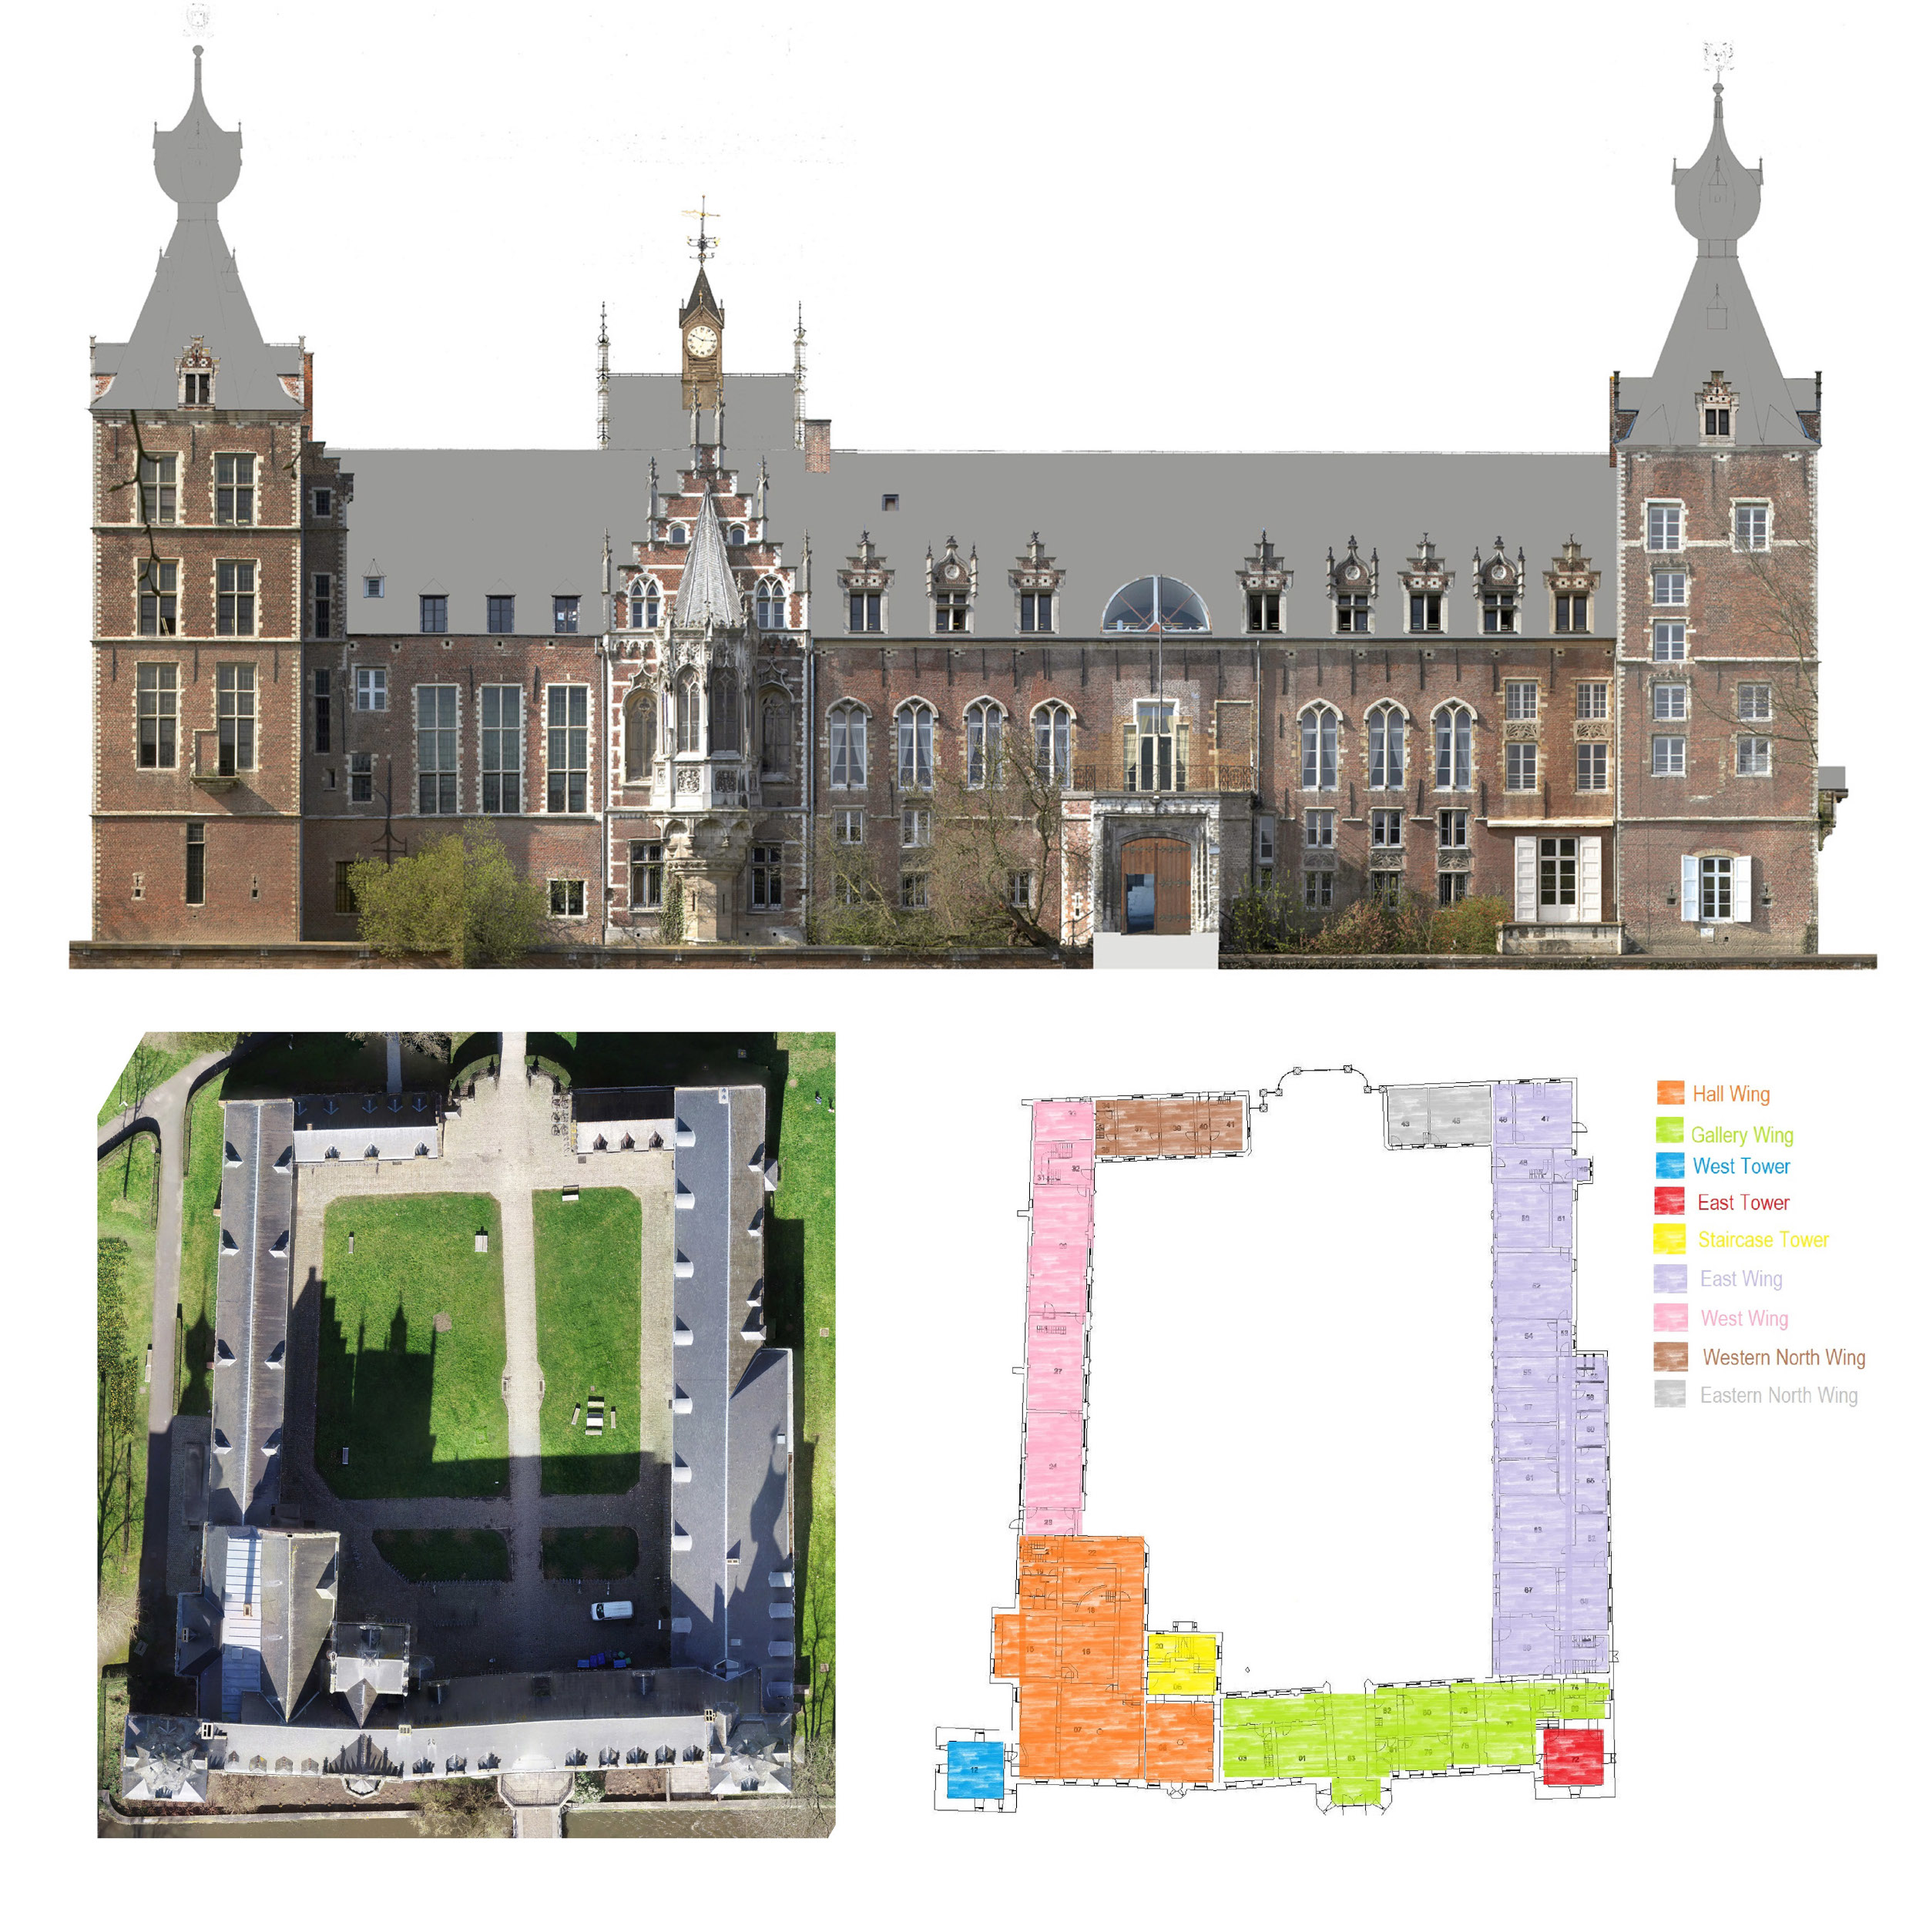 Fig. 3: South facade of Arenberg Castle, above [image: KU Leuven /
                              Koufopoulos et al. 2021]; aerial view of the main building, left [image: KU
                              Leuven / Koufopoulos et al. 2021]; floor plan of the ground floor with color
                              labeling of different structural units, right. [Image: atlas plan, KU
                              Leuven, Technical
                                 Services]